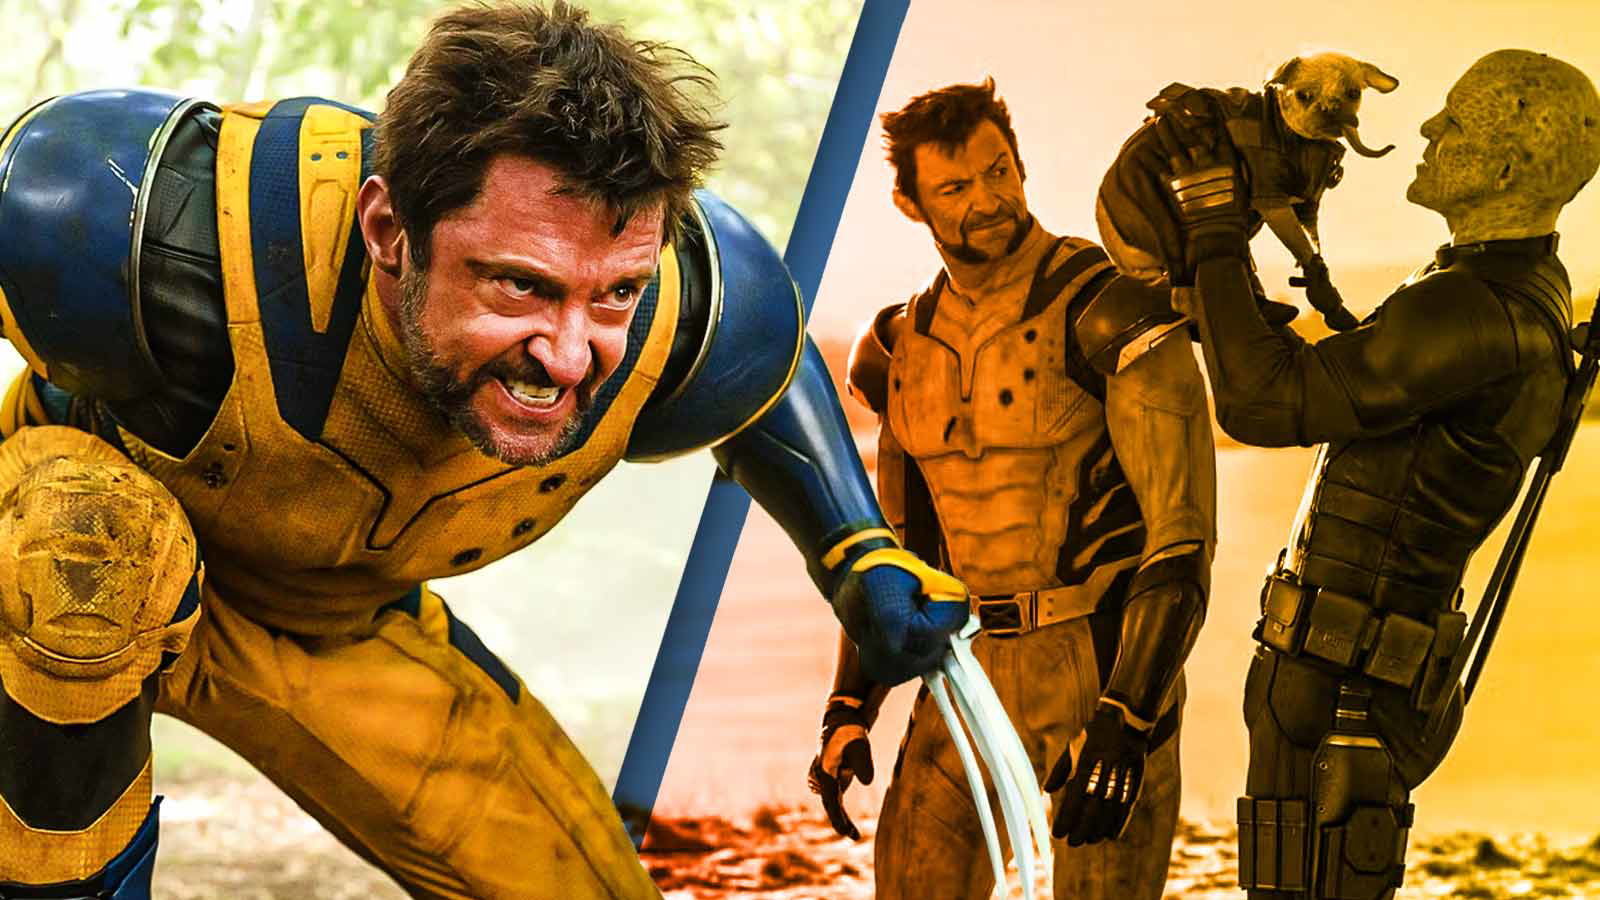 Hugh Jackman Found an Outlet for His Inner Darkness on the Sets of Deadpool & Wolverine, Claims the Film Saved Him “a Fortune in Therapy”